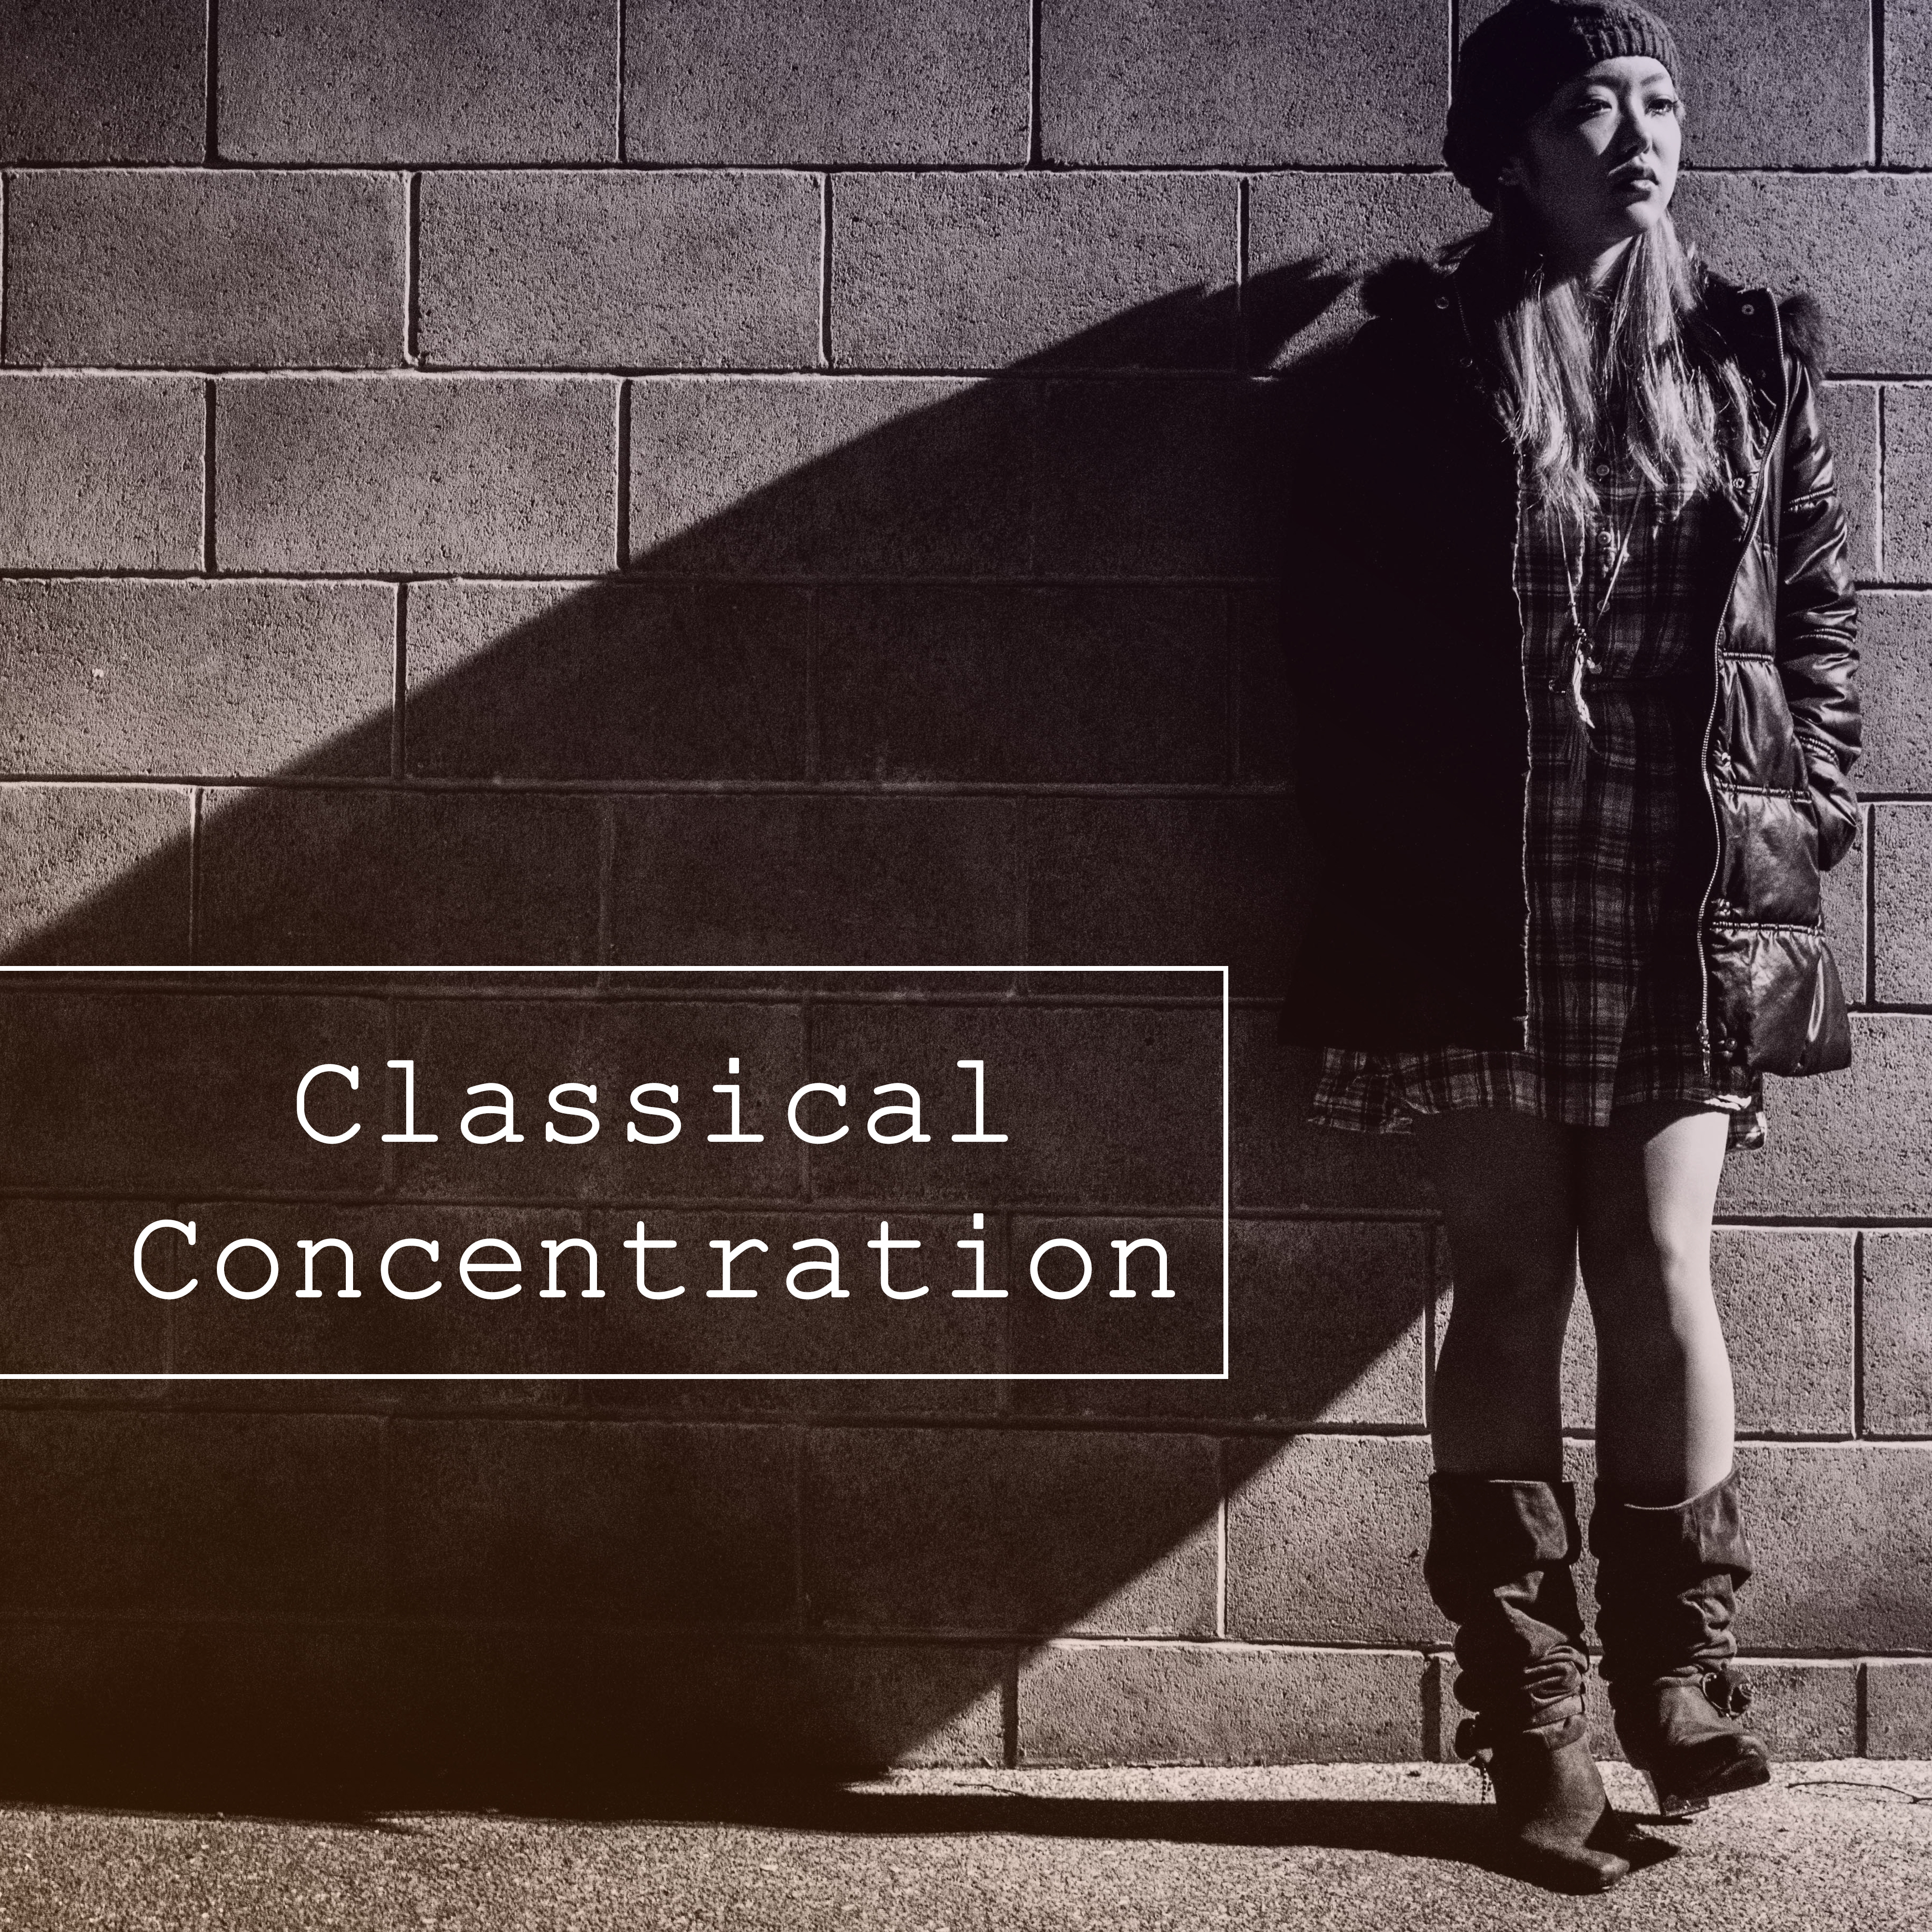 Classical Concentration  Classical Songs for Study, Easier Learning, Einstein Effect, Deep Focus, Bach, Beethoven, Mozart